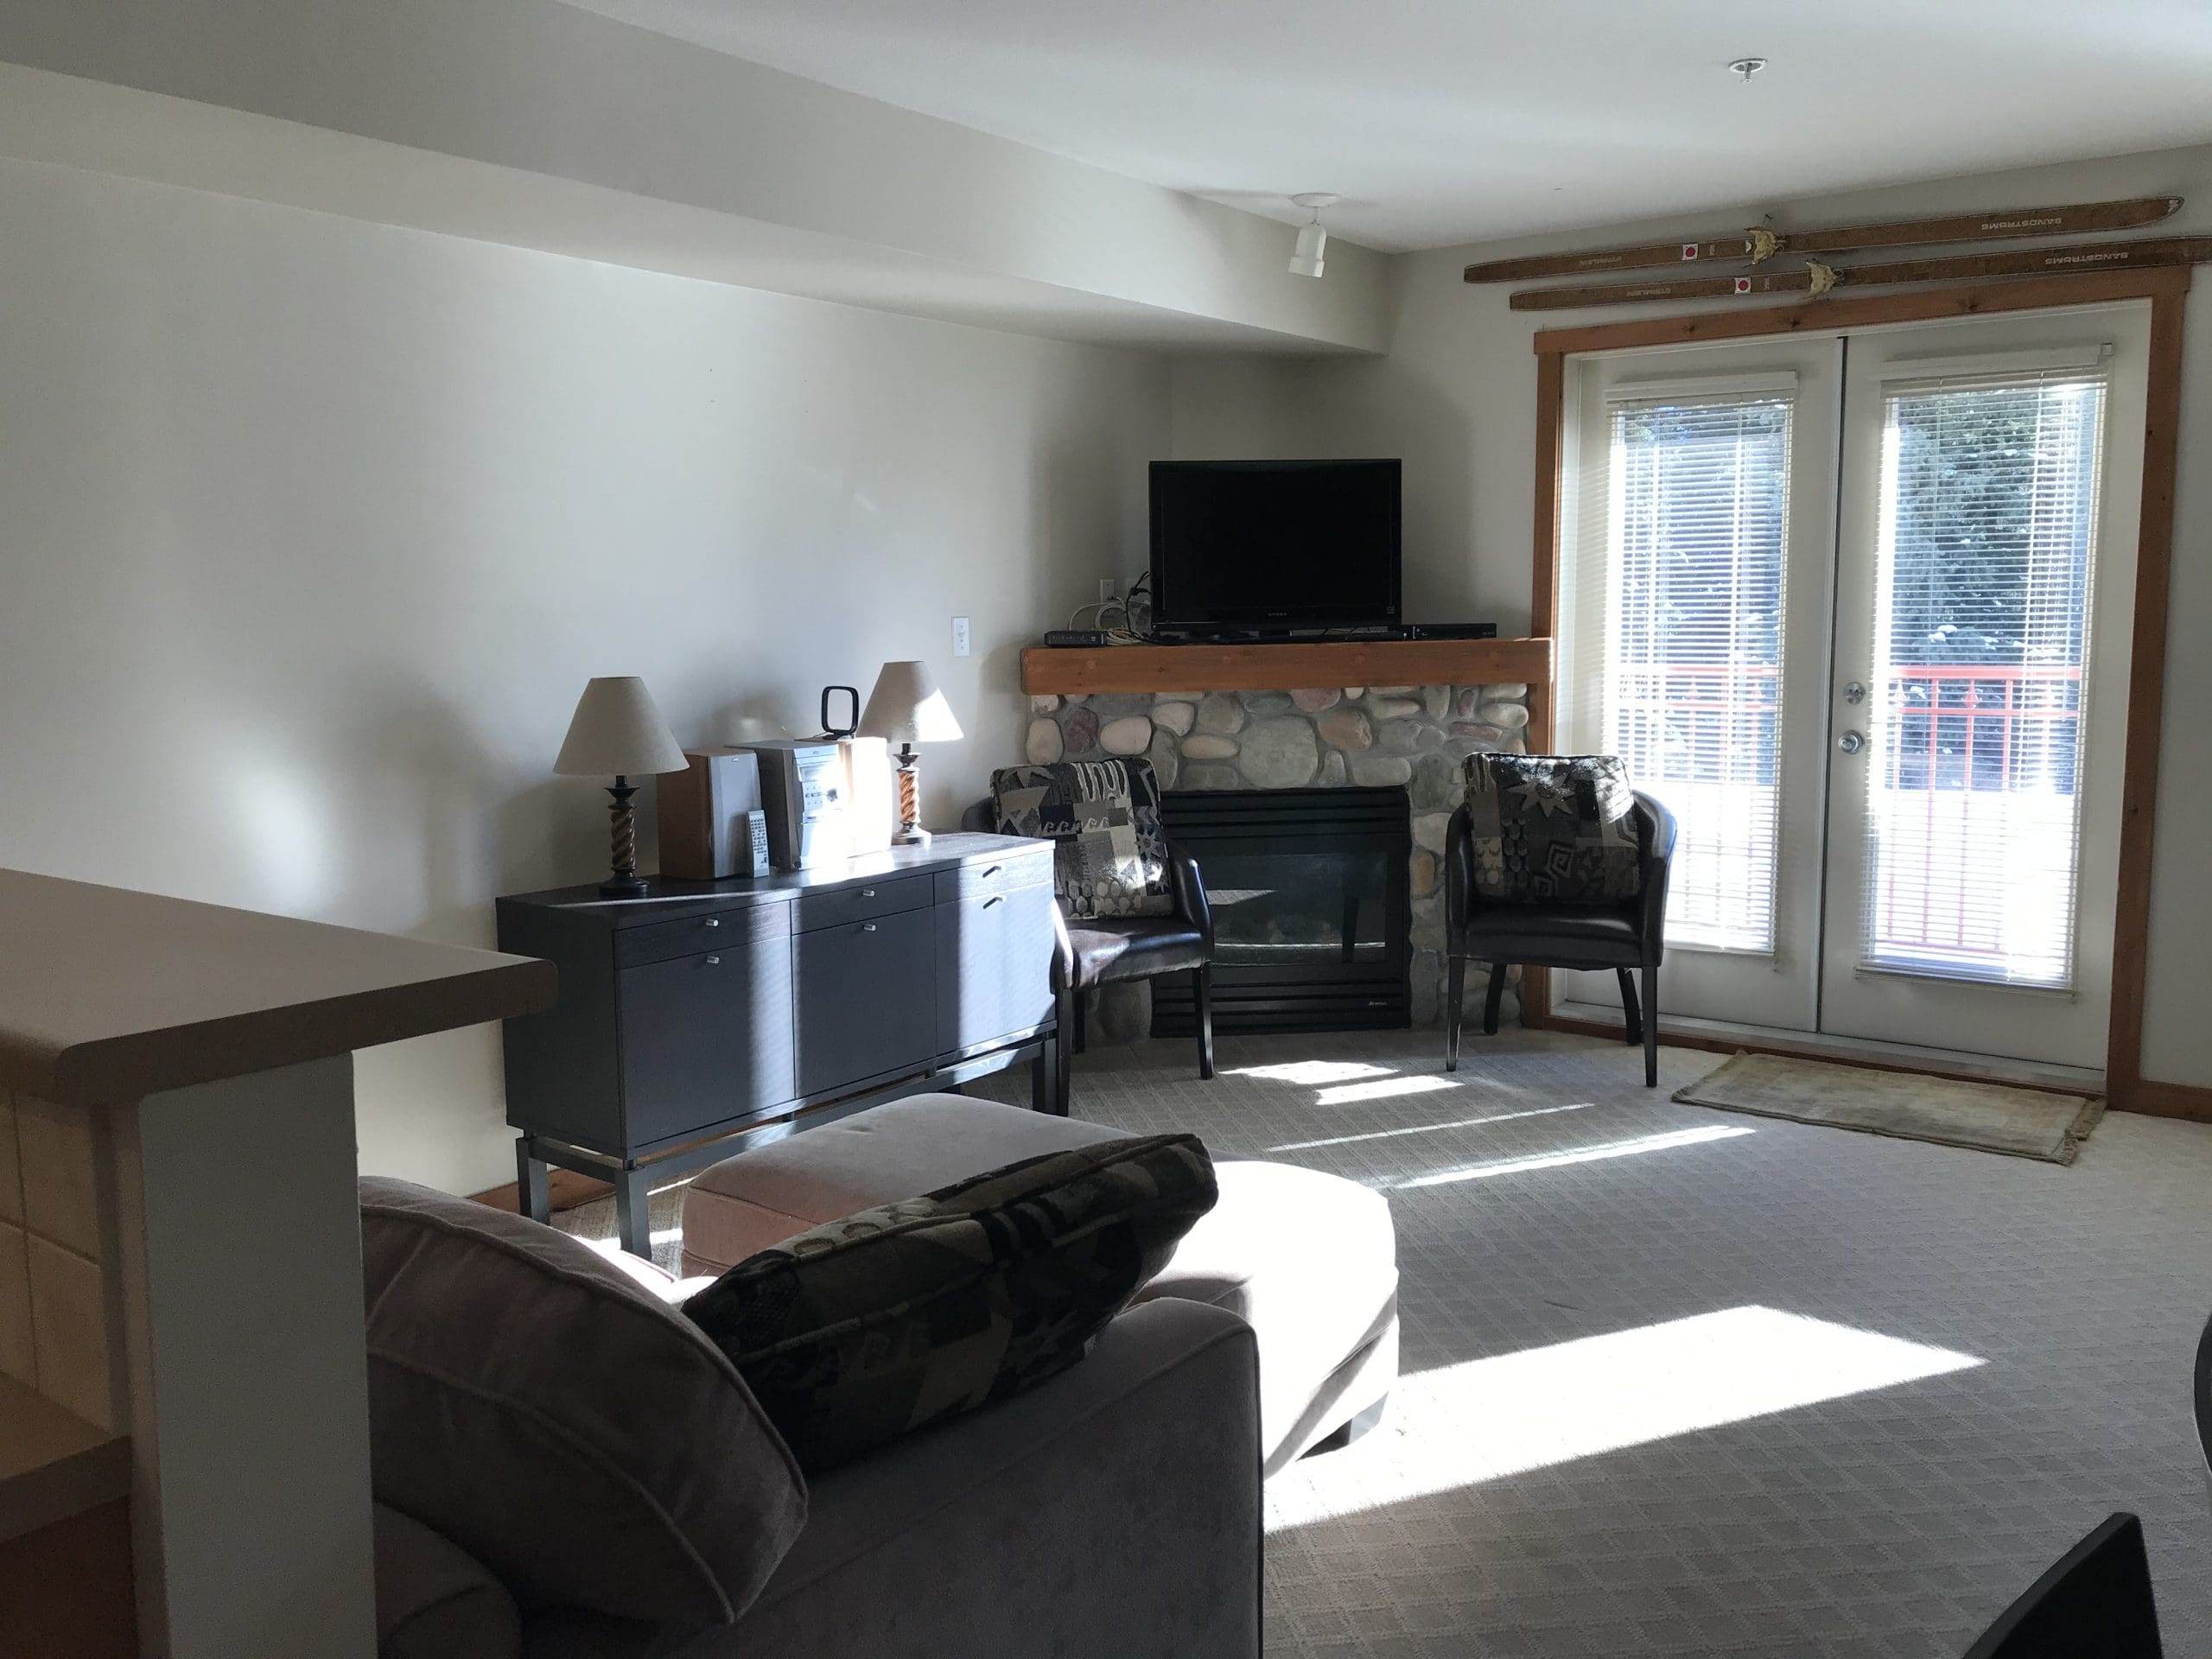 Studio condo at Creekside with direct access to the ski hill, pet-friendly, gas fireplace and murphy bed.